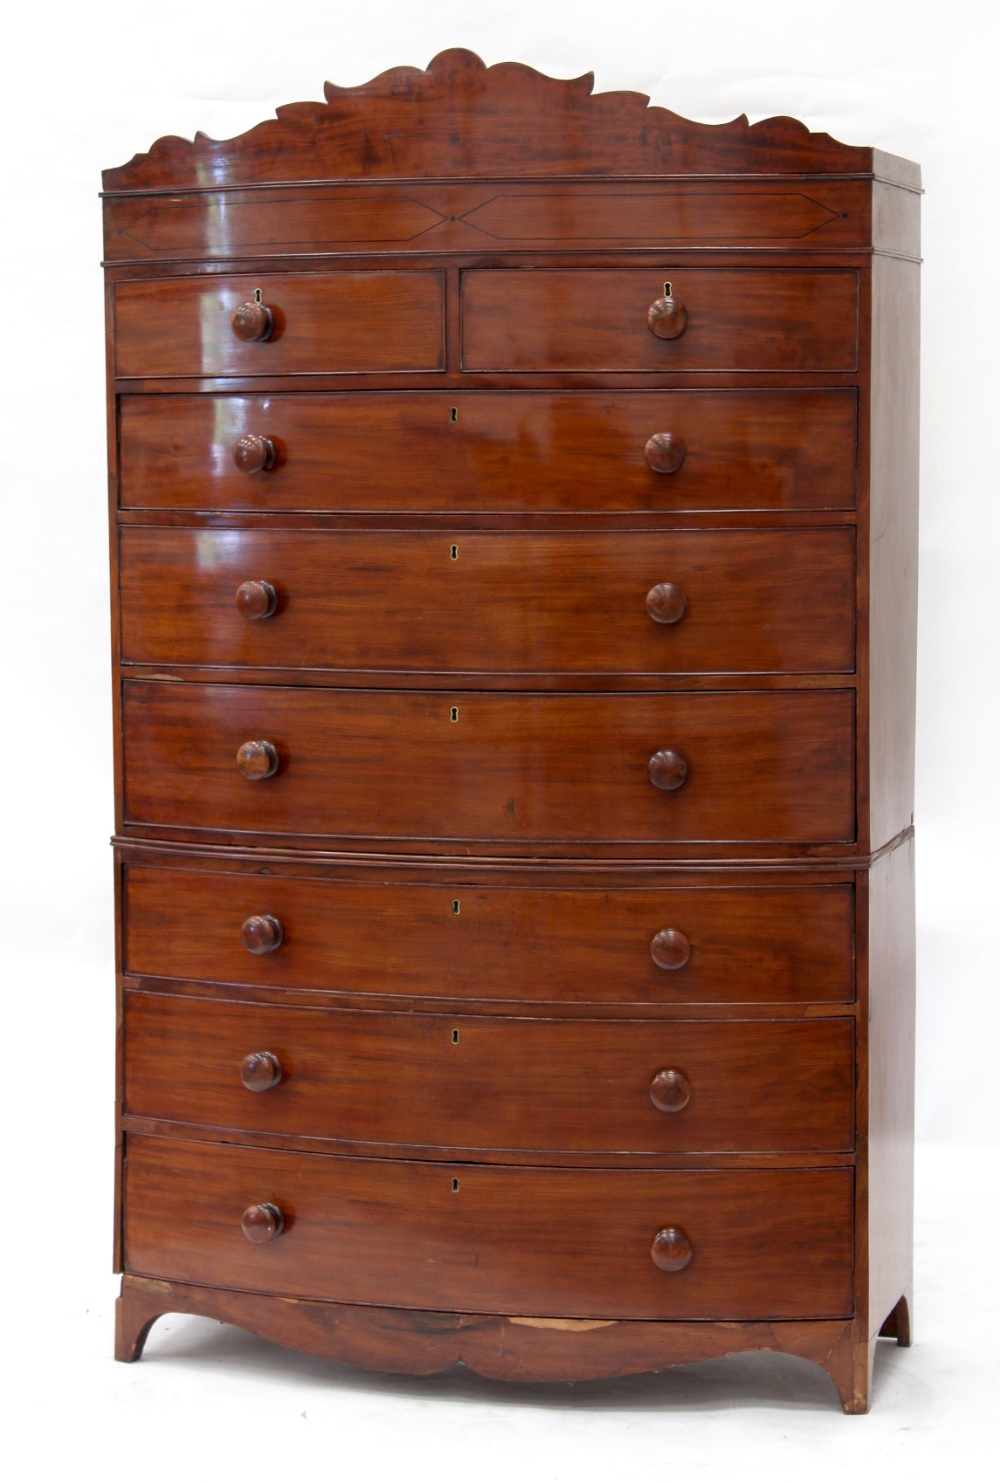 Property of a gentleman - an early 19th century mahogany bow-fronted tallboy or chest-on-chest, with